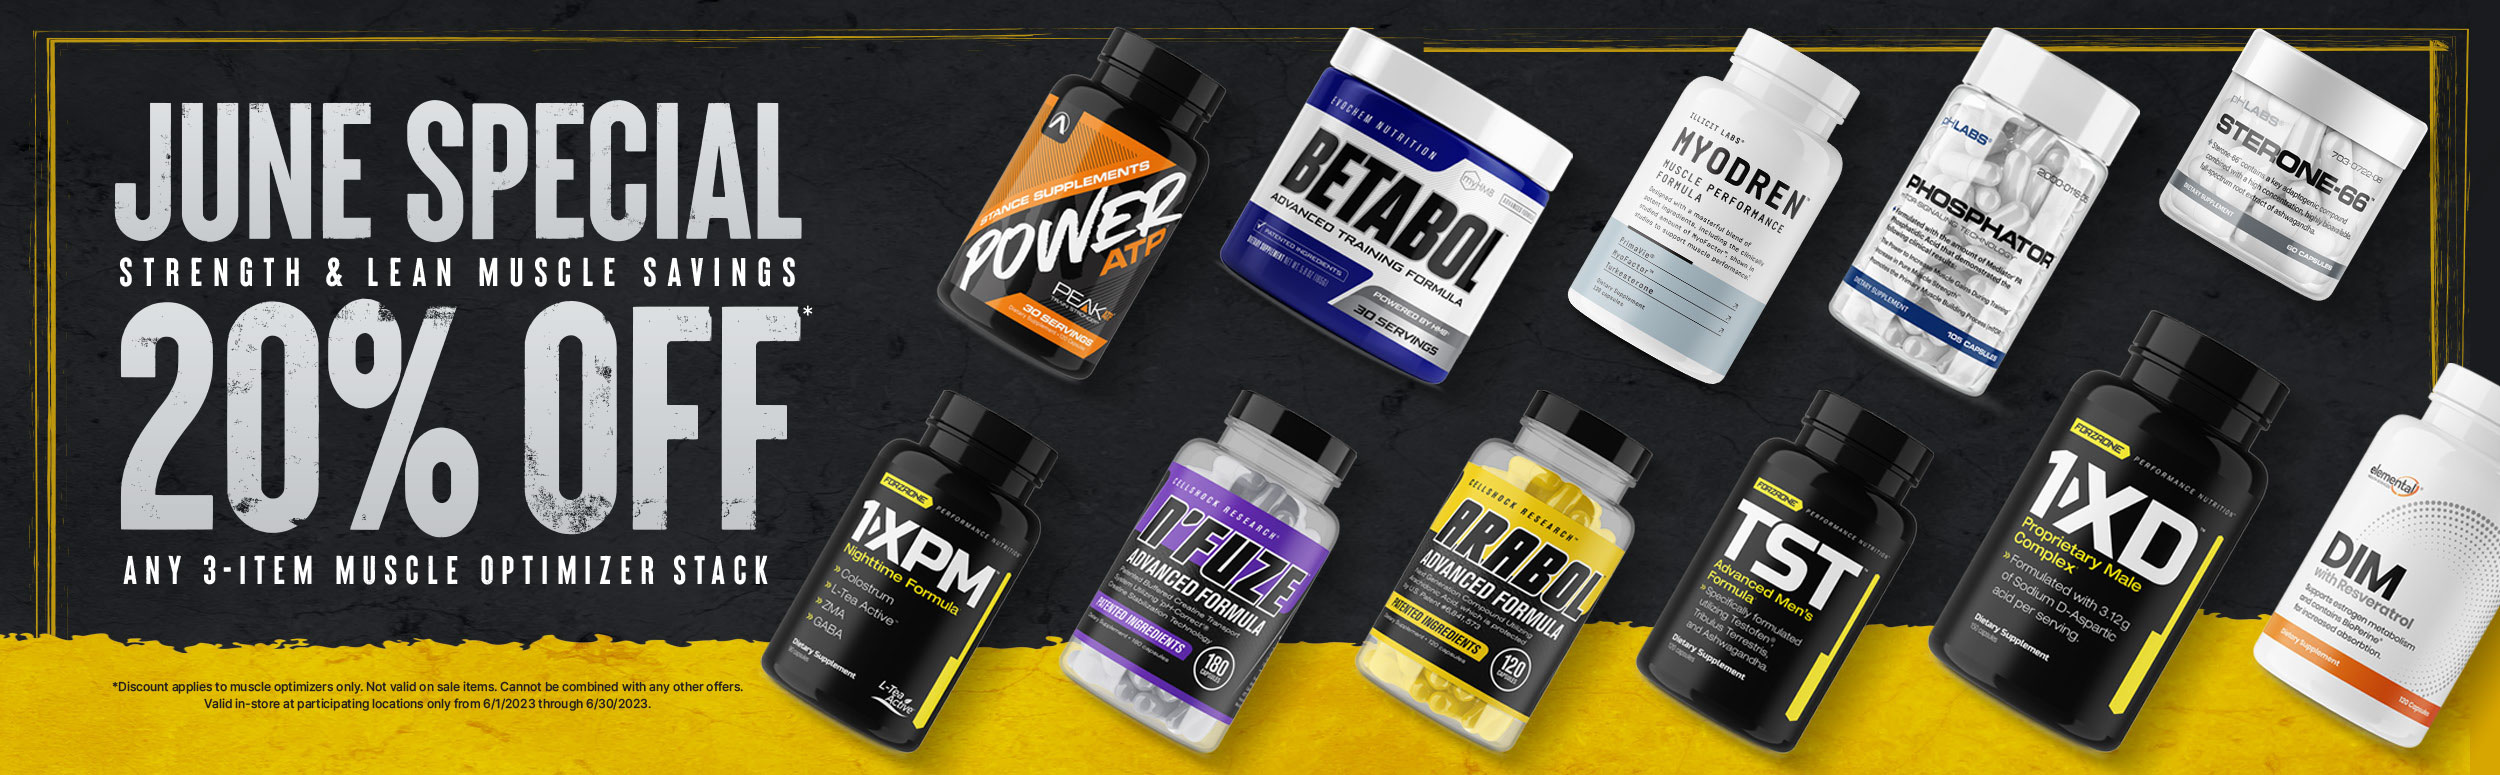 June special strength and lean muscle savings 20% off any three item muscle optimizer stack